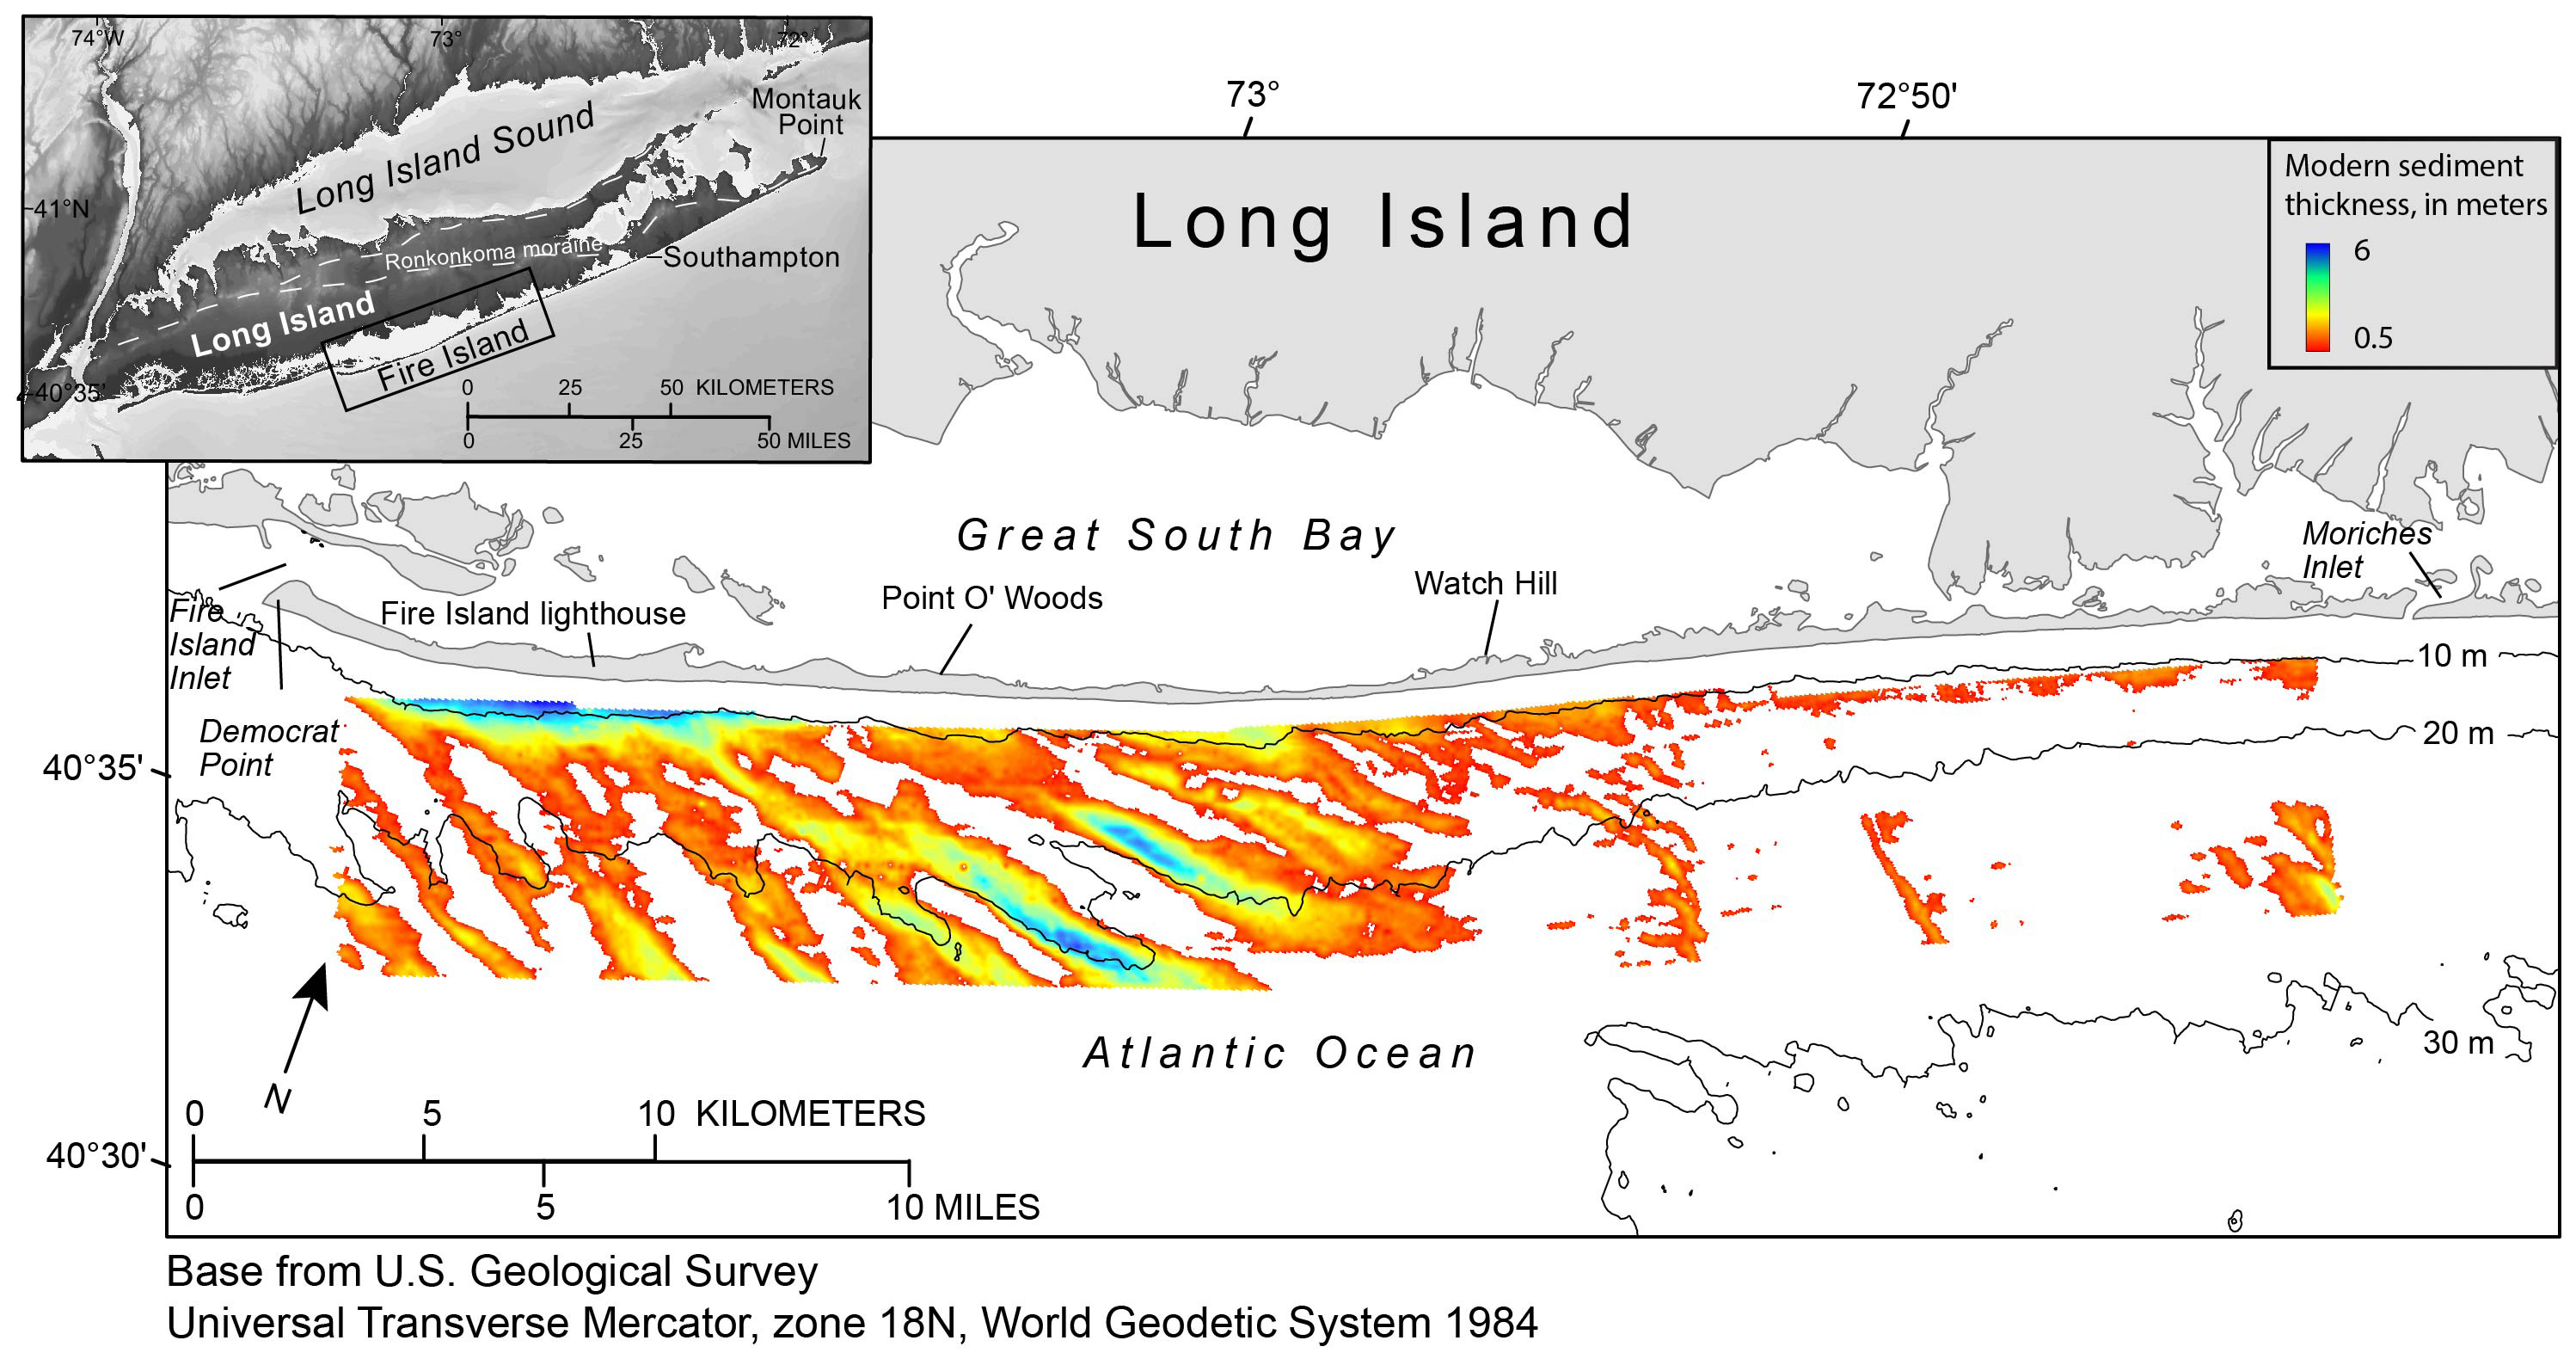 image showing survey location and modern sediment thickness offshore of Fire Island, NY